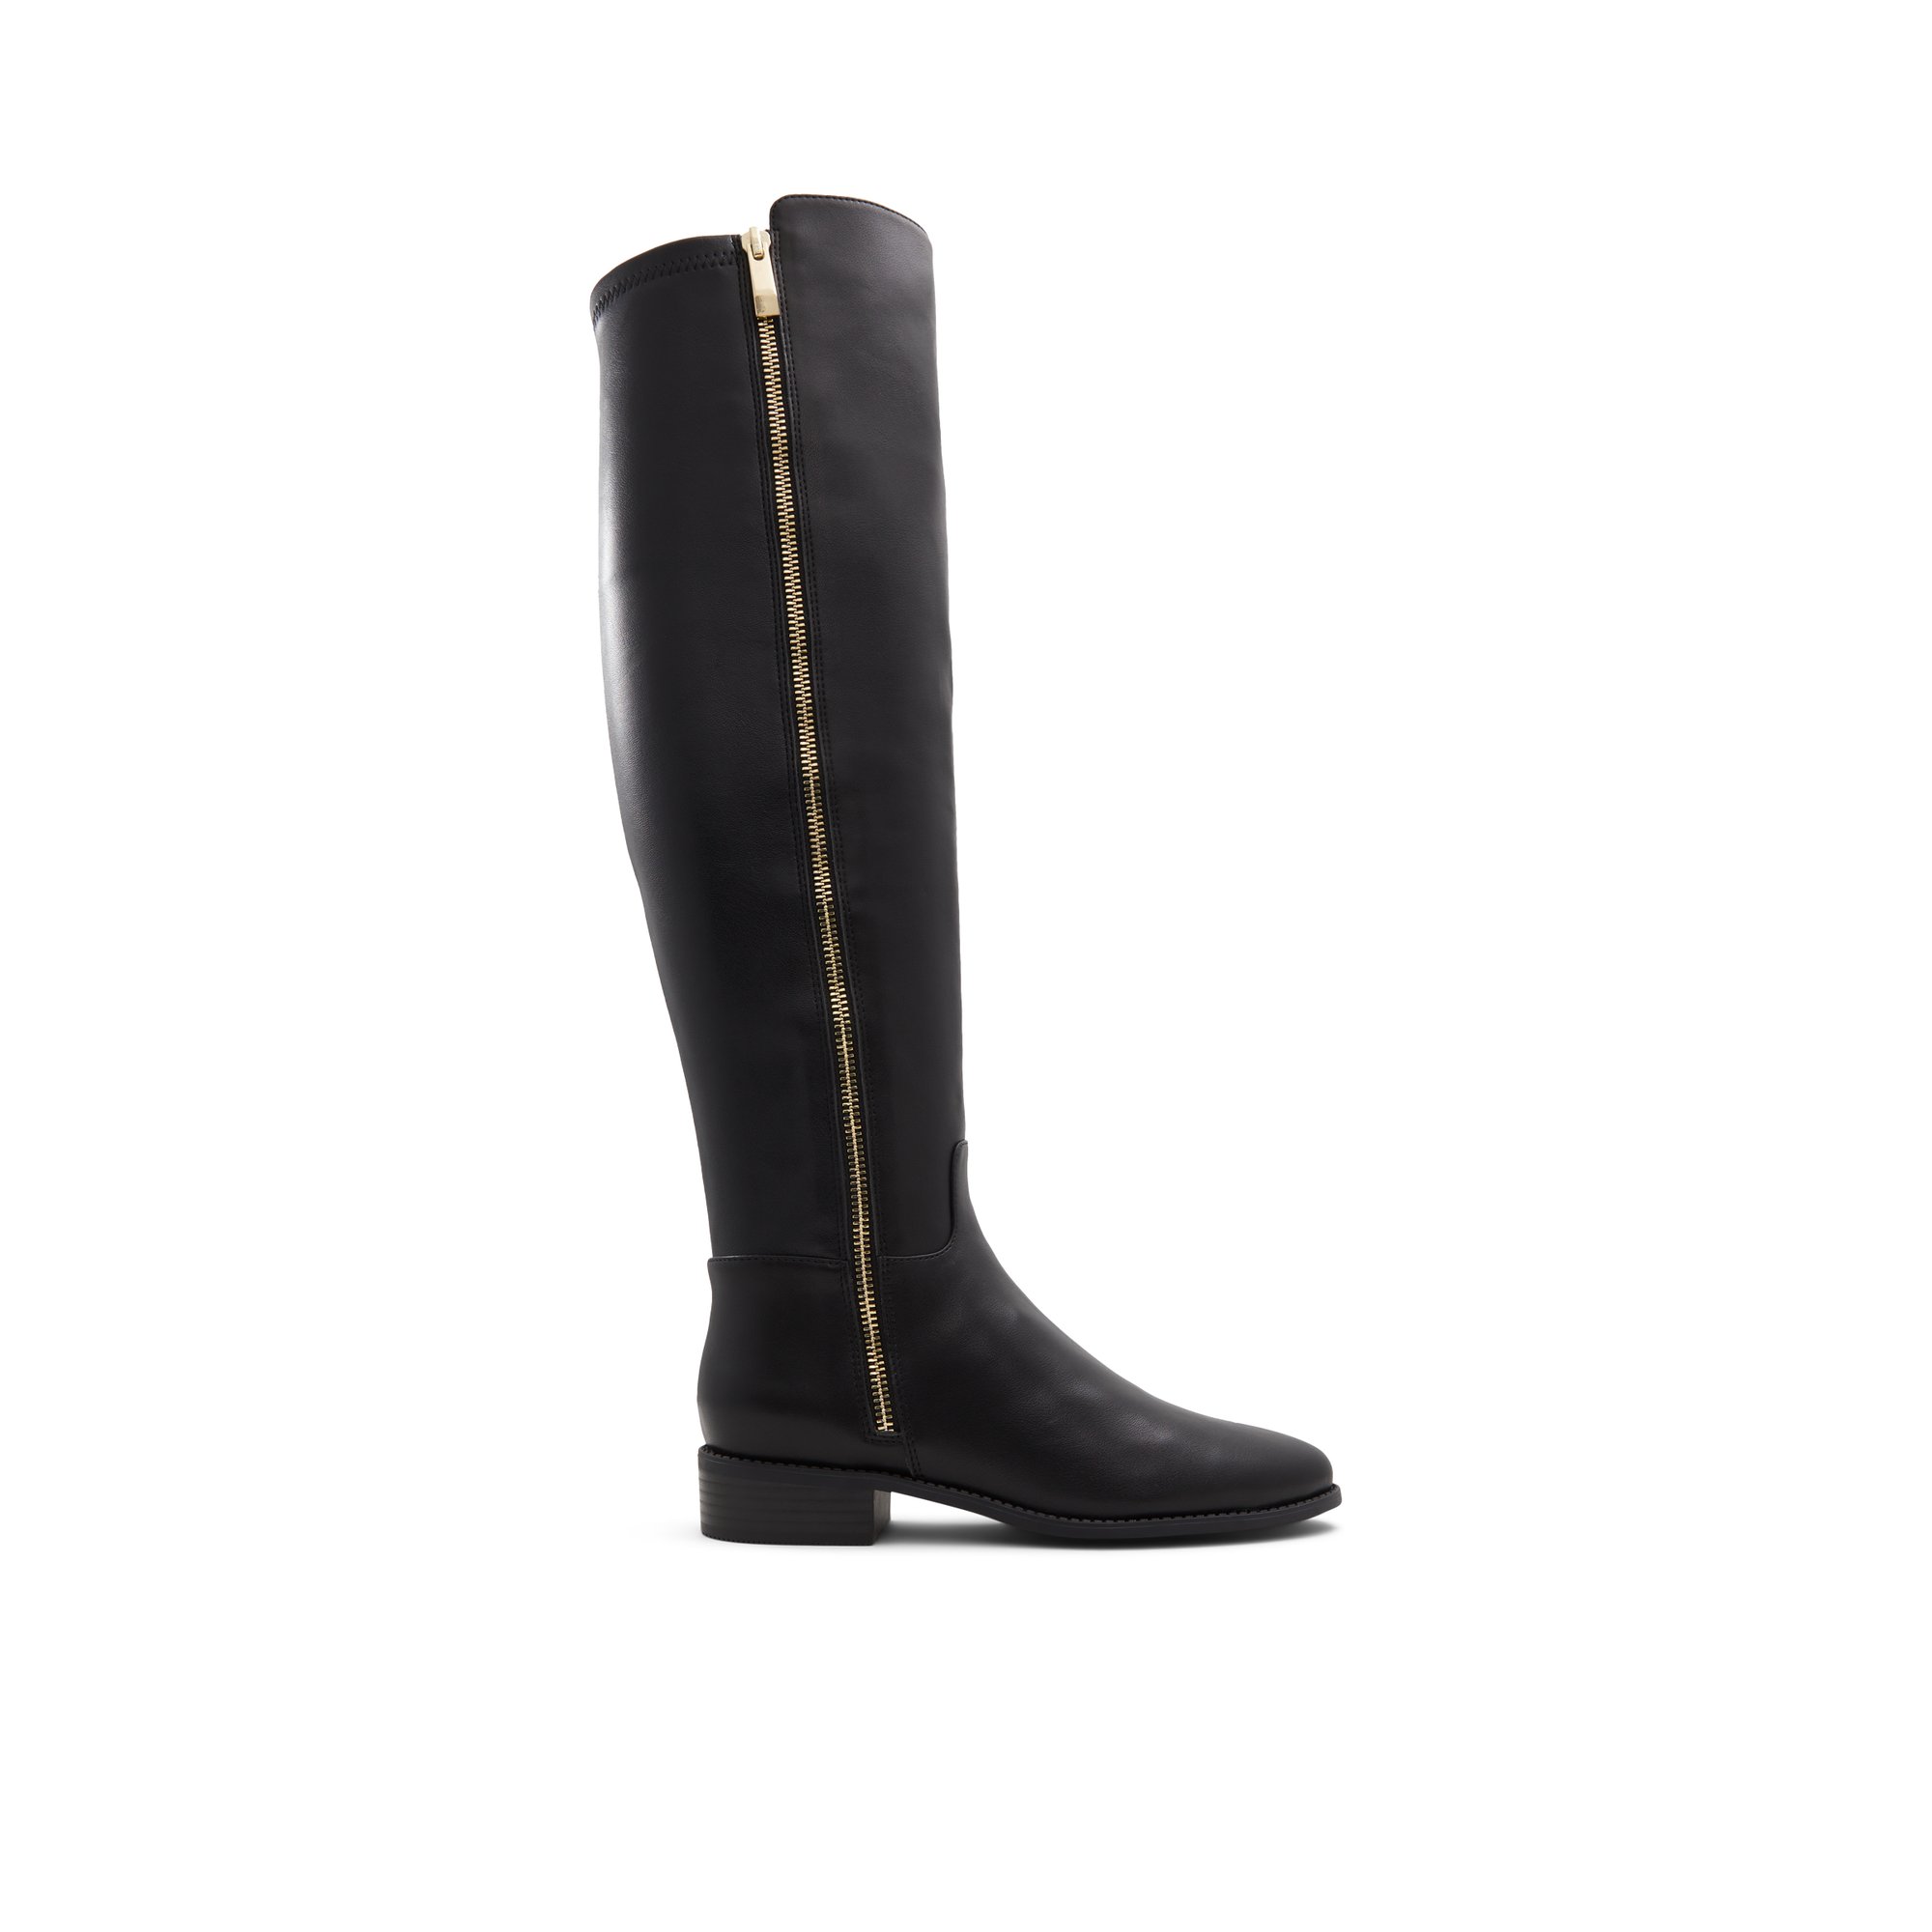 ALDO Aahliyah - Women's Boots Tall - Black